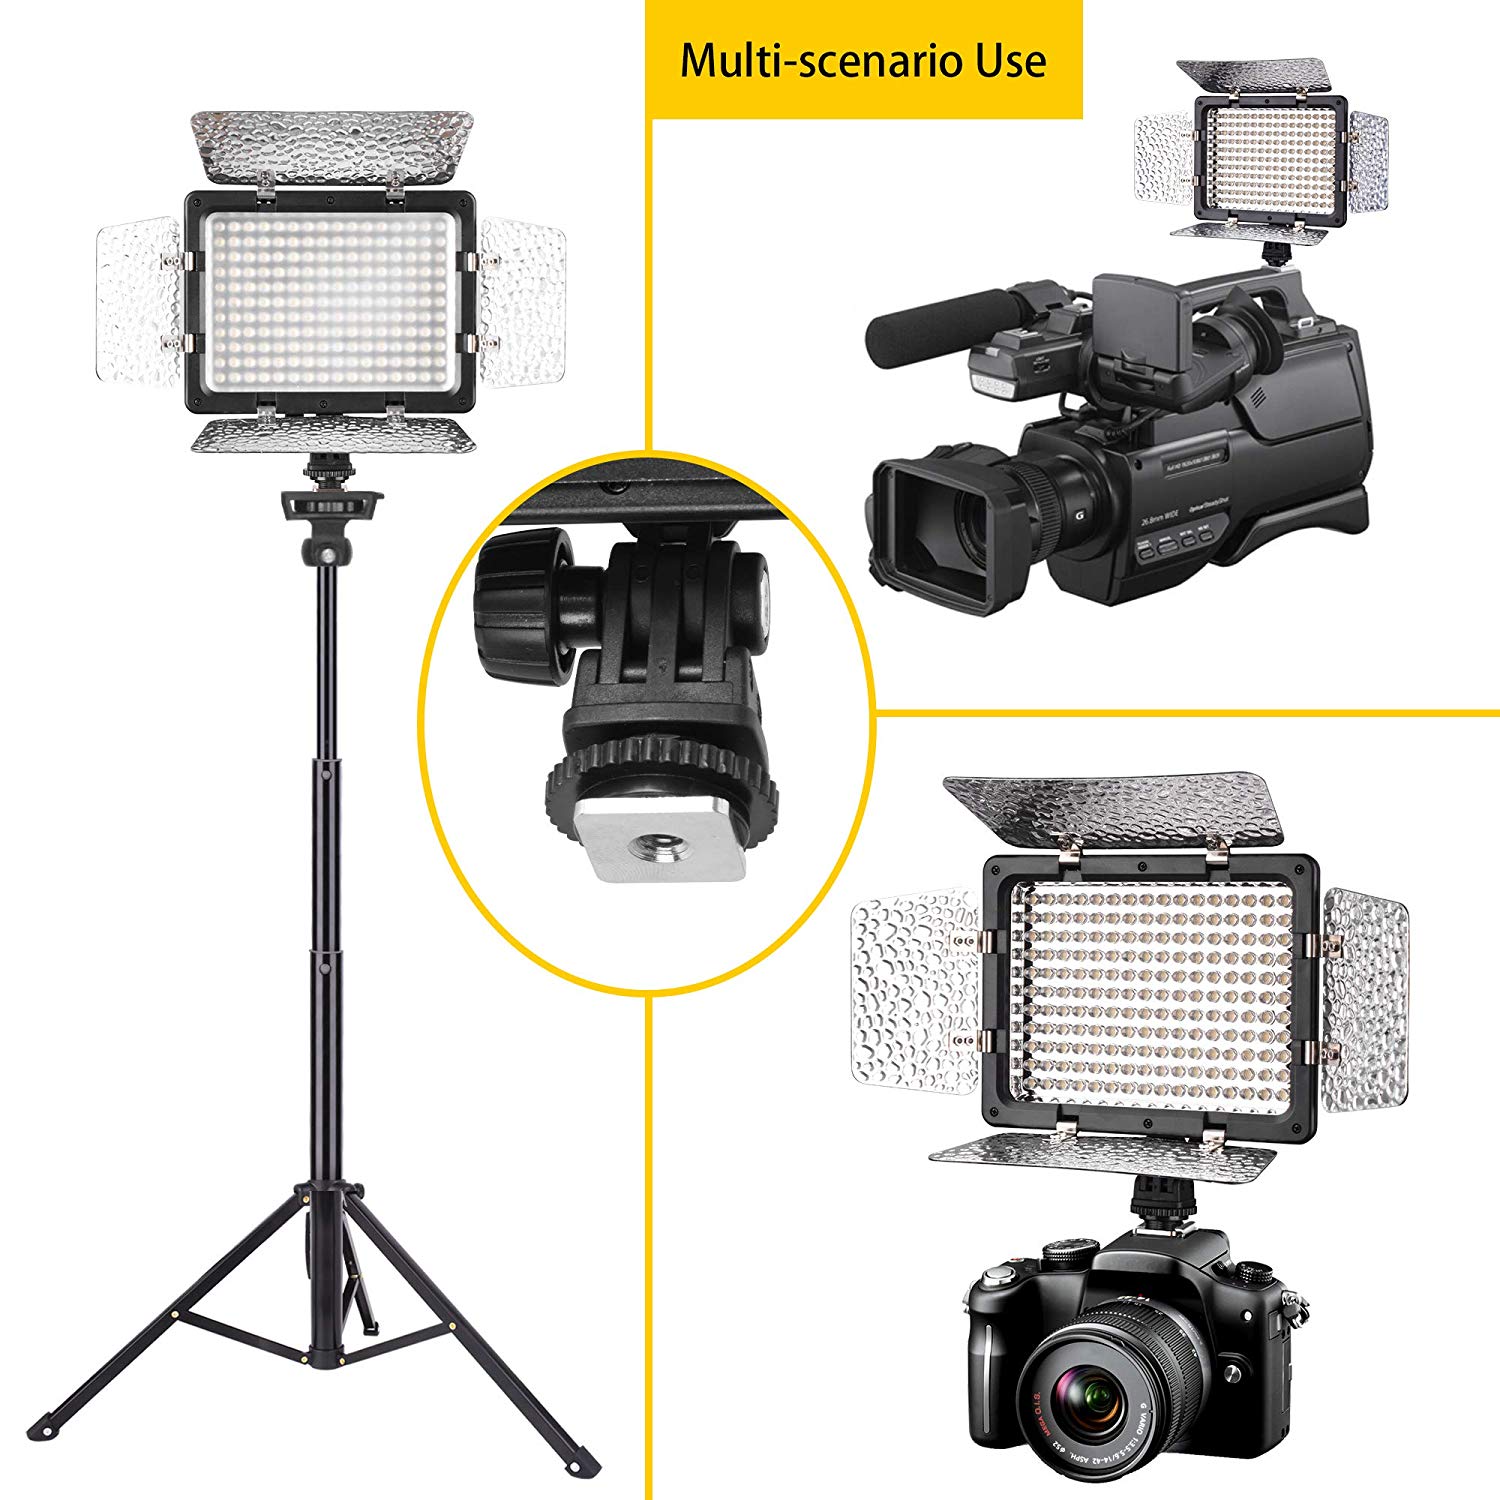 Ideas Illuminated EMART Dimmable 176 LED Panel Video Studio Light Kit with Adjustable Tripod Stand, Rechargeable Batteries Use - 2 Pack - EMART INTERNATIONAL, INC (Official Website)